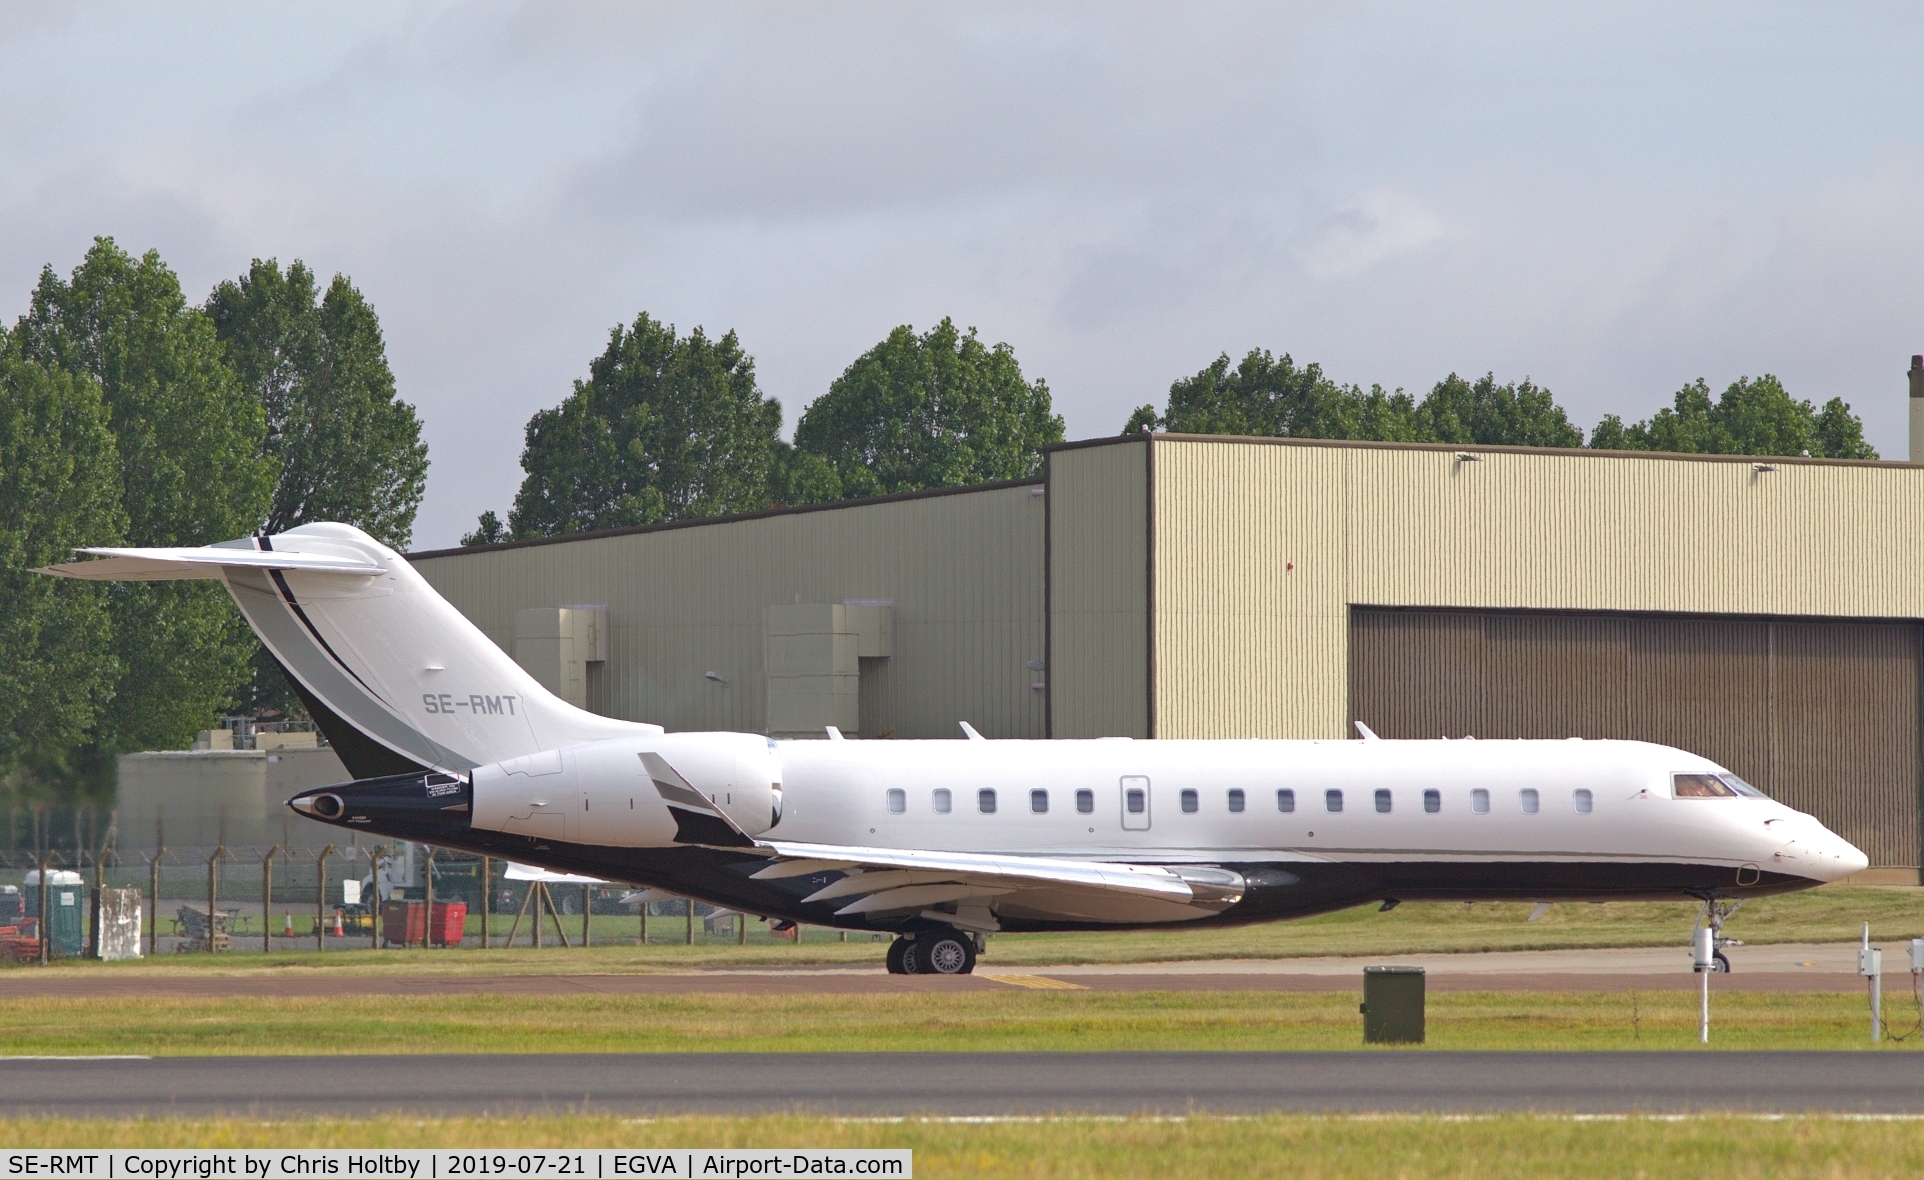 SE-RMT, 2014 Bombardier BD-700-1A10 Global 6000 C/N 9624, Taxiing to take-off prior to RIAT 2019 display at RAF Fairford